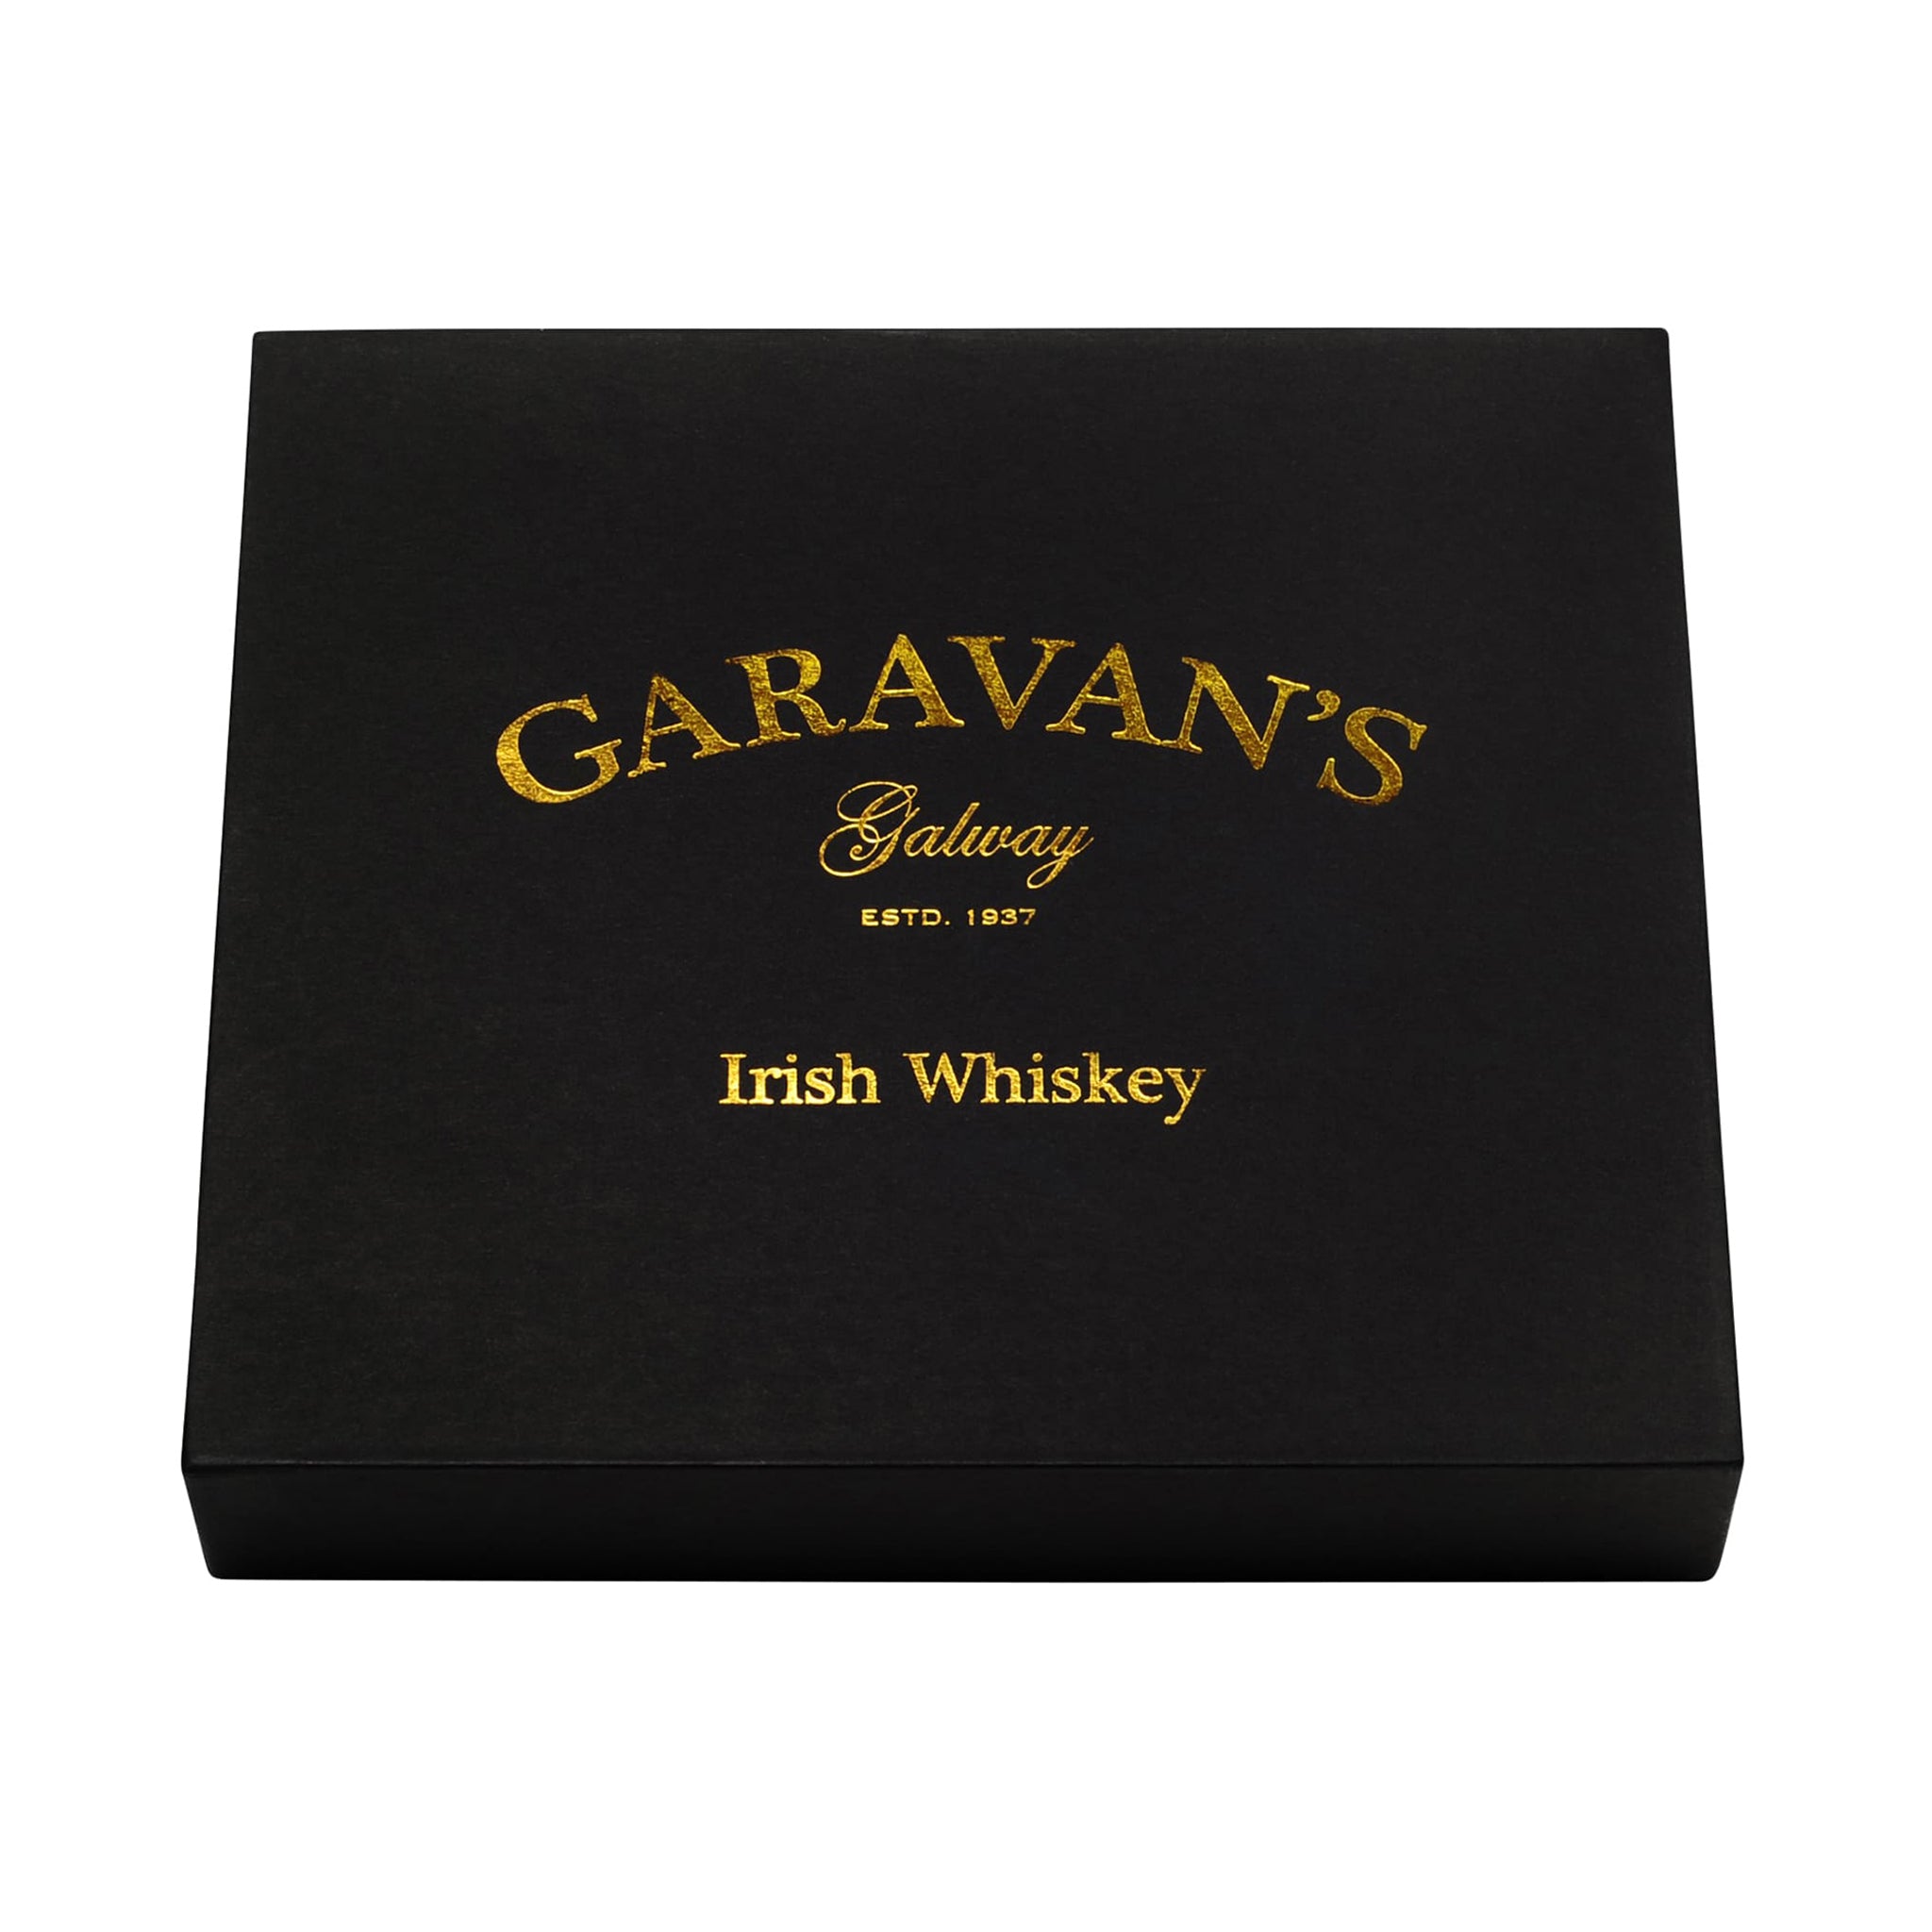 Garavan’s Whiskey and Glass Set - Luxurious Gift for Whiskey Lovers - Expertly Crafted Irish Whiskey Glasses and 8-Year Single Malt Whiskey in Velvet-lined Gift Box